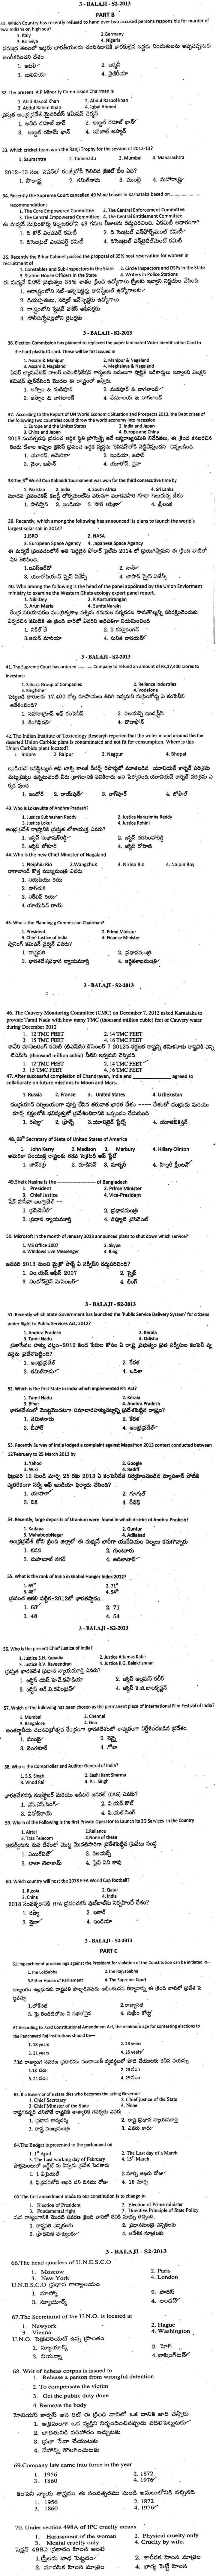 LAWCET 2013 Previous Year Question Paper with Solution